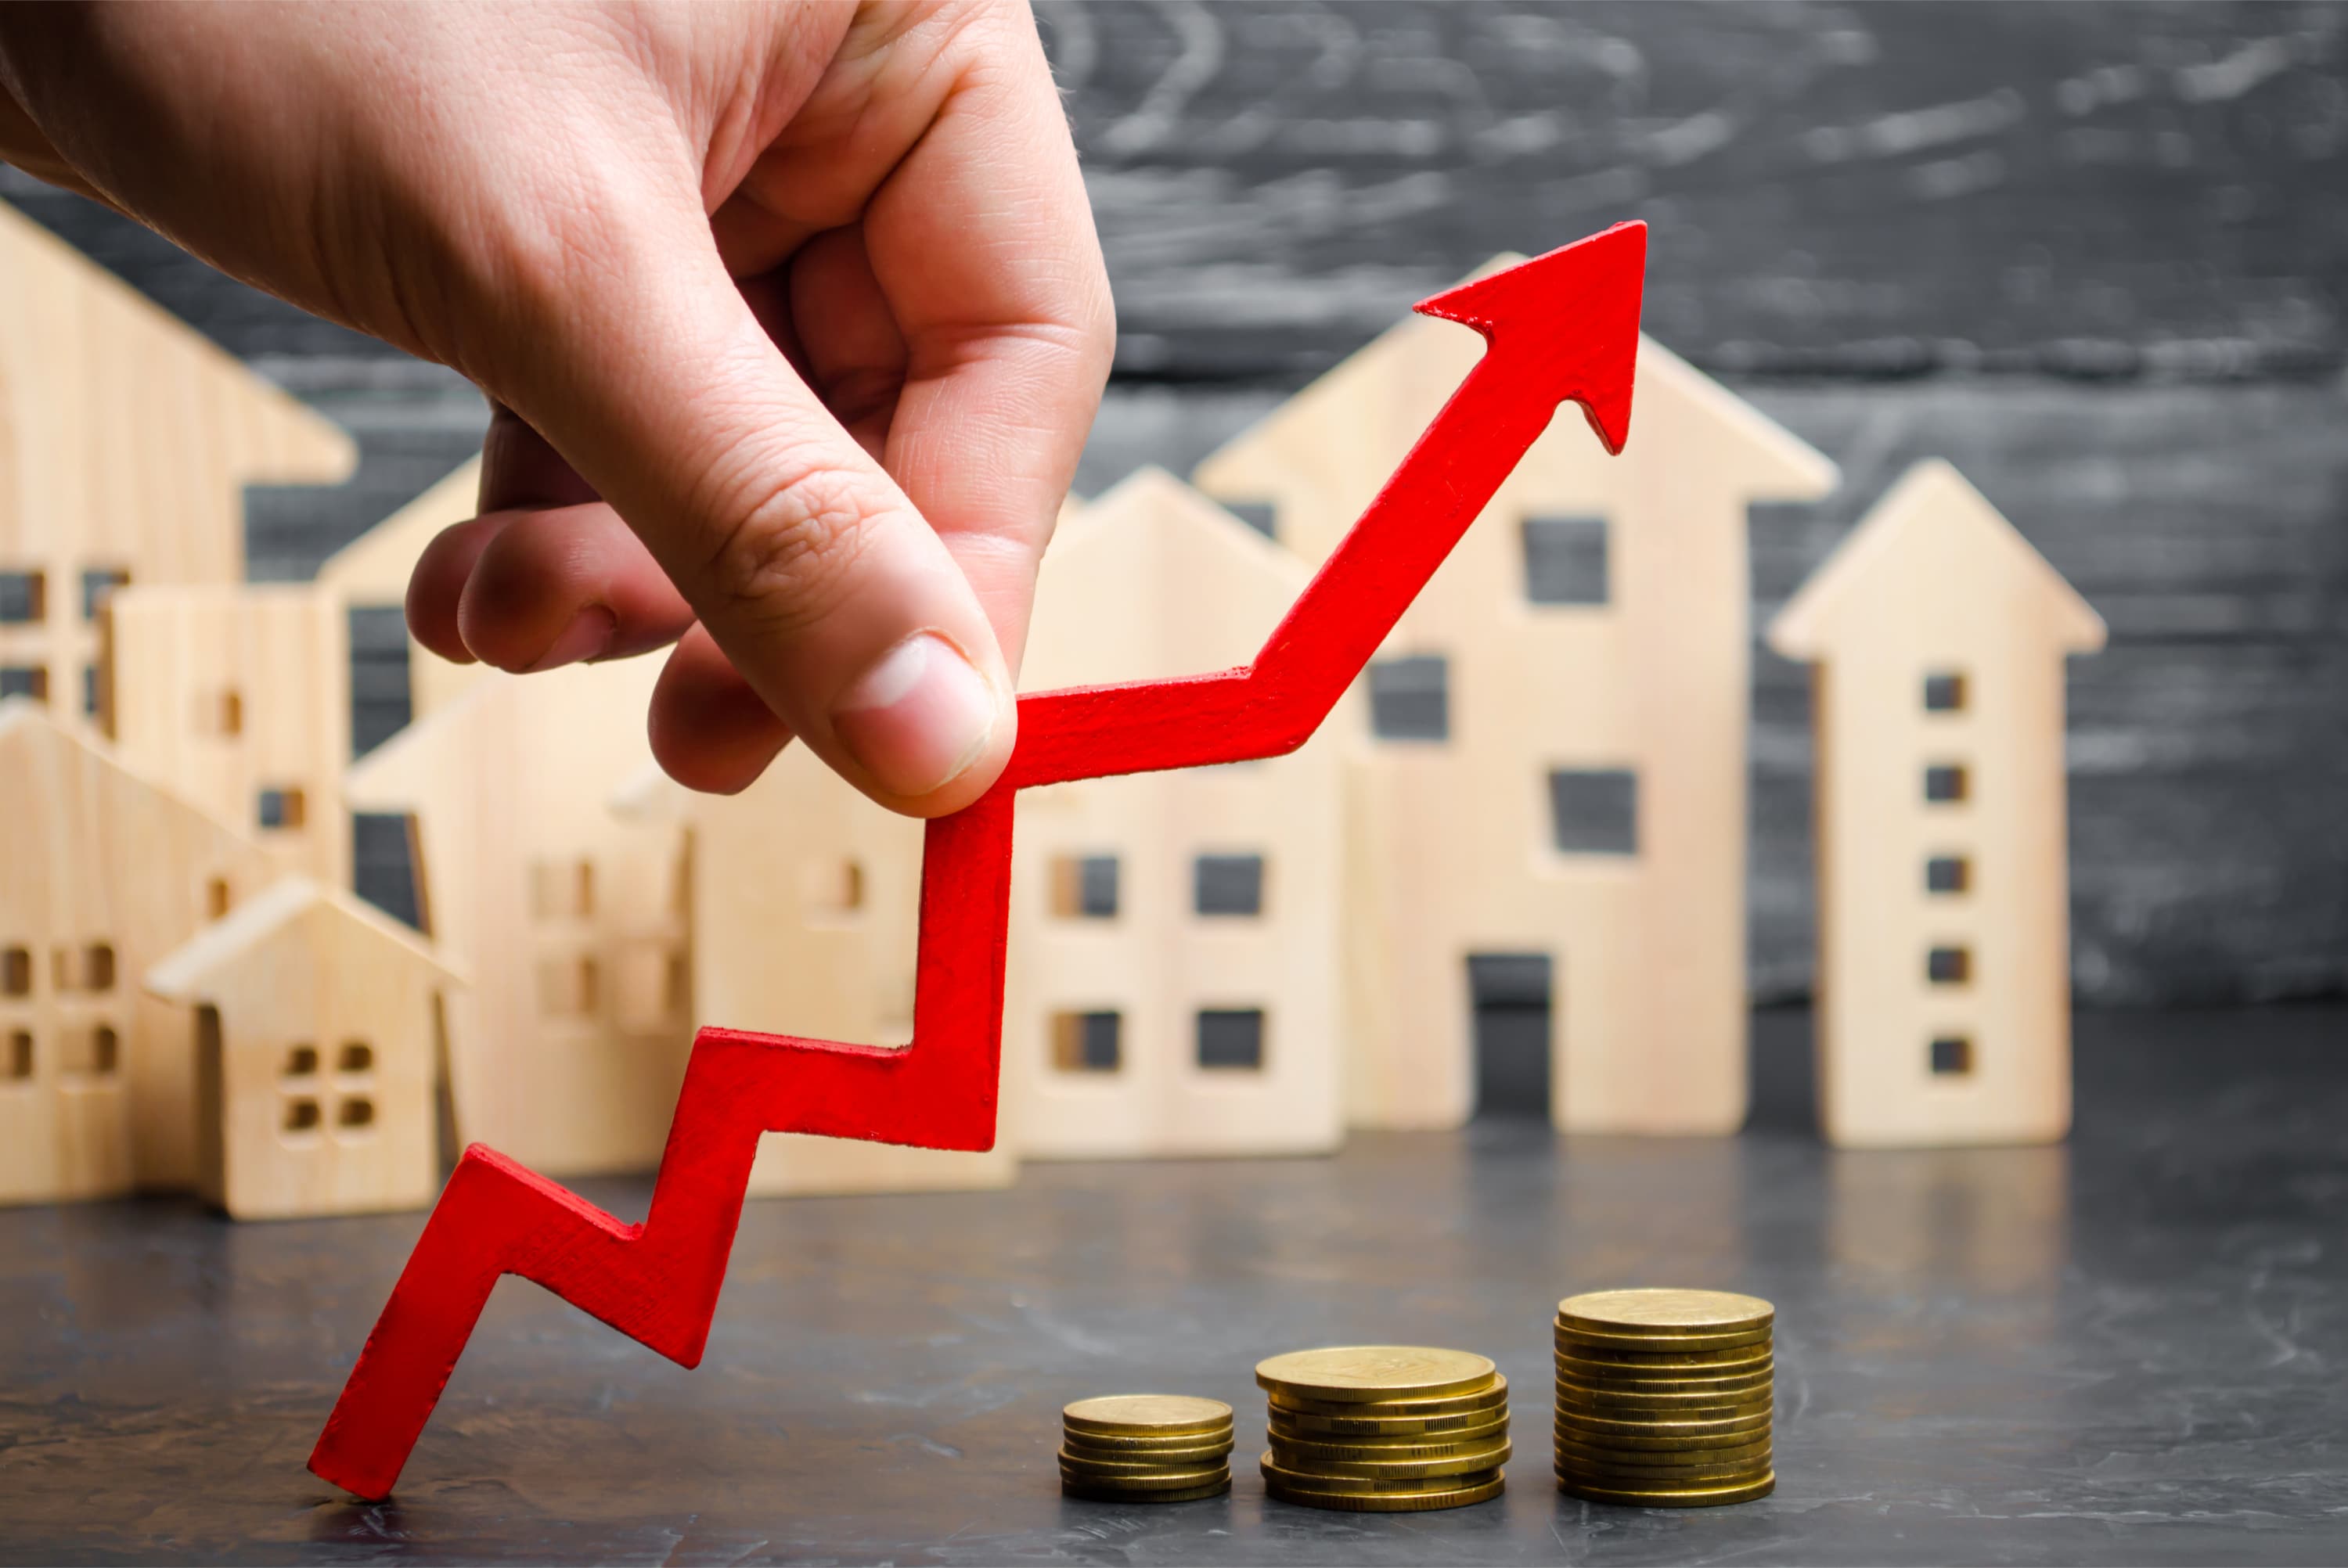 Can real estate investment be a profitable bet?